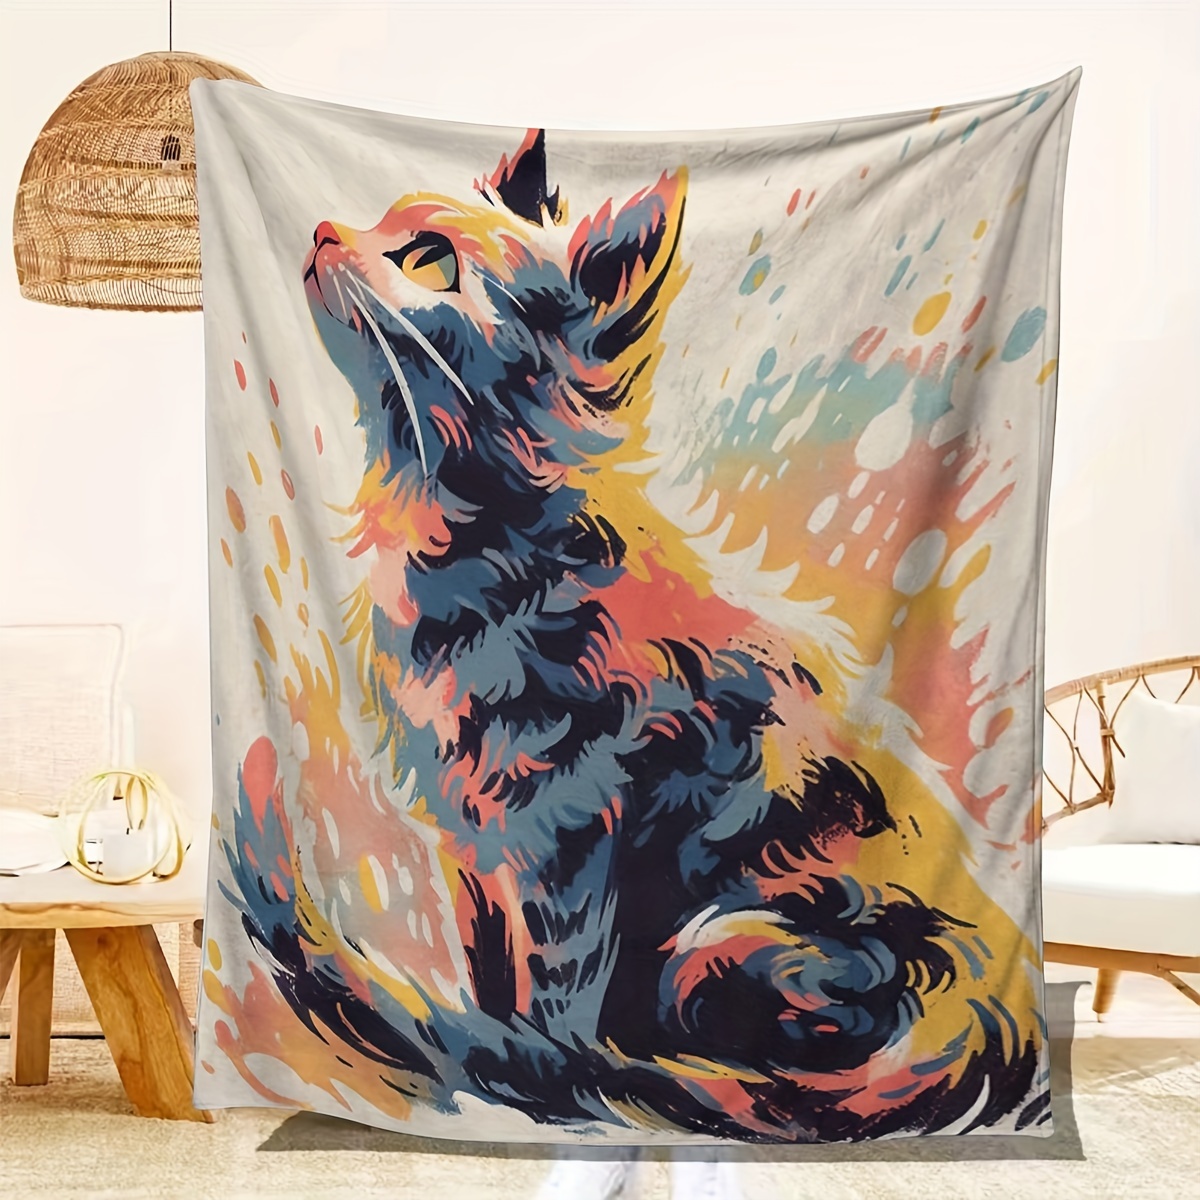 Cat Throw Blanket for Cat Lovers Cute Cat Flannel Fleece Blankets for Kids  Adults Kawaii Colorful Cat Print Lightweight Fuzzy Blanket Soft Blanket for